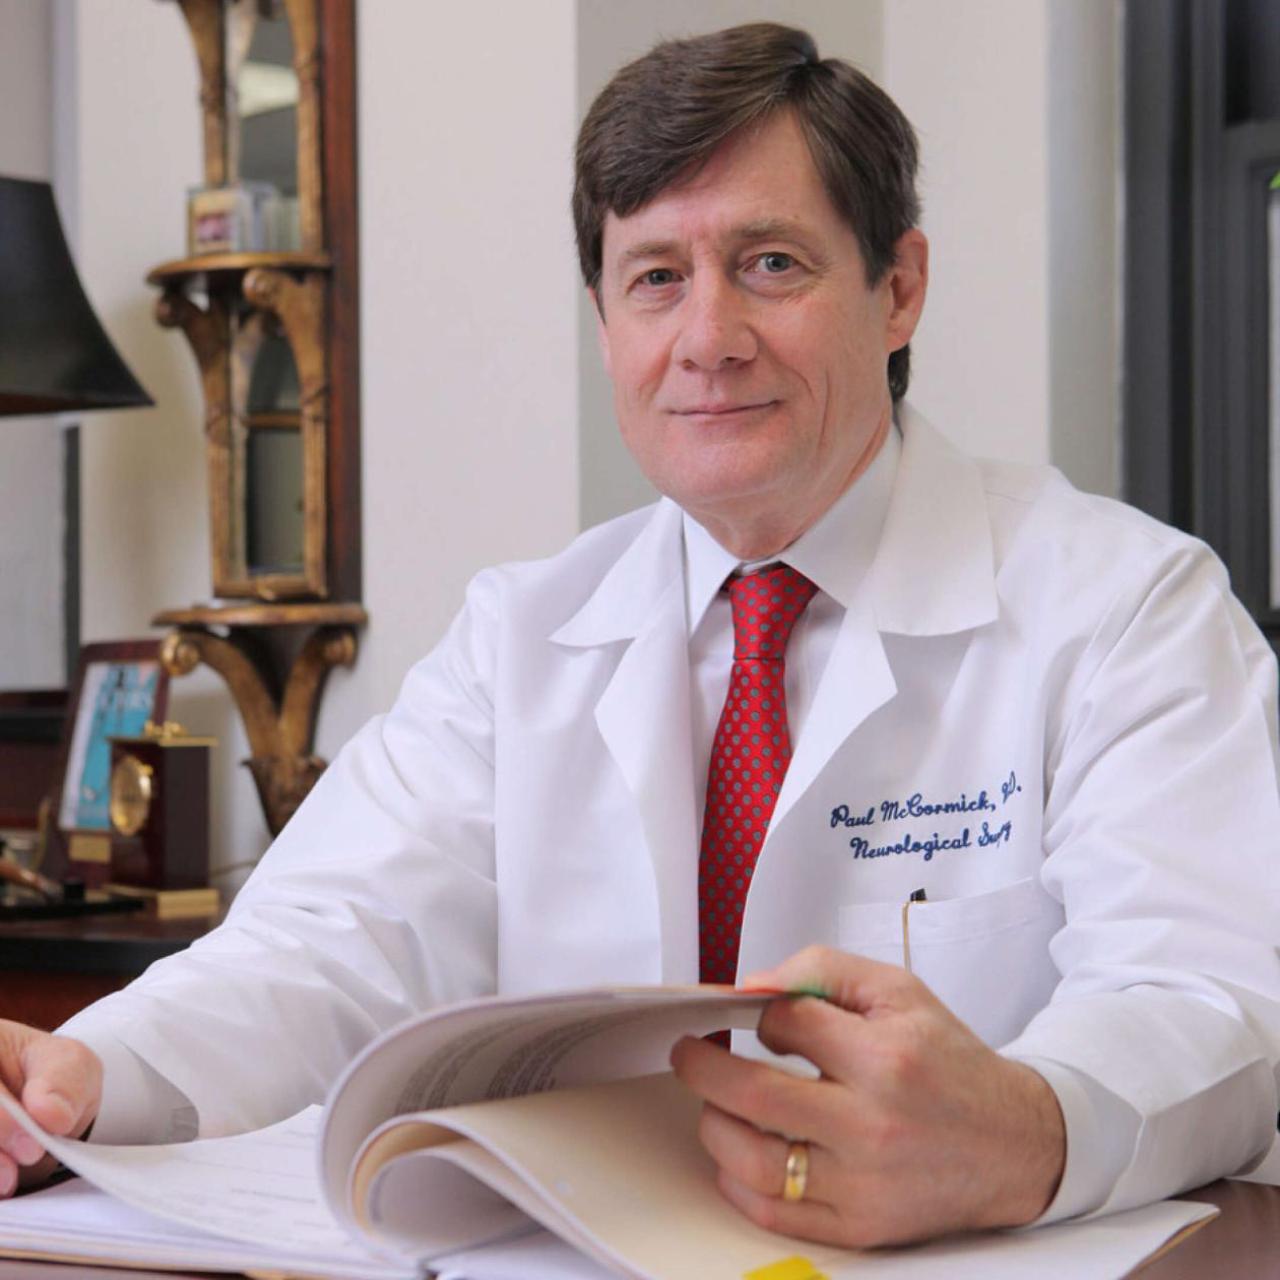 Dr. Paul McCormick in his office